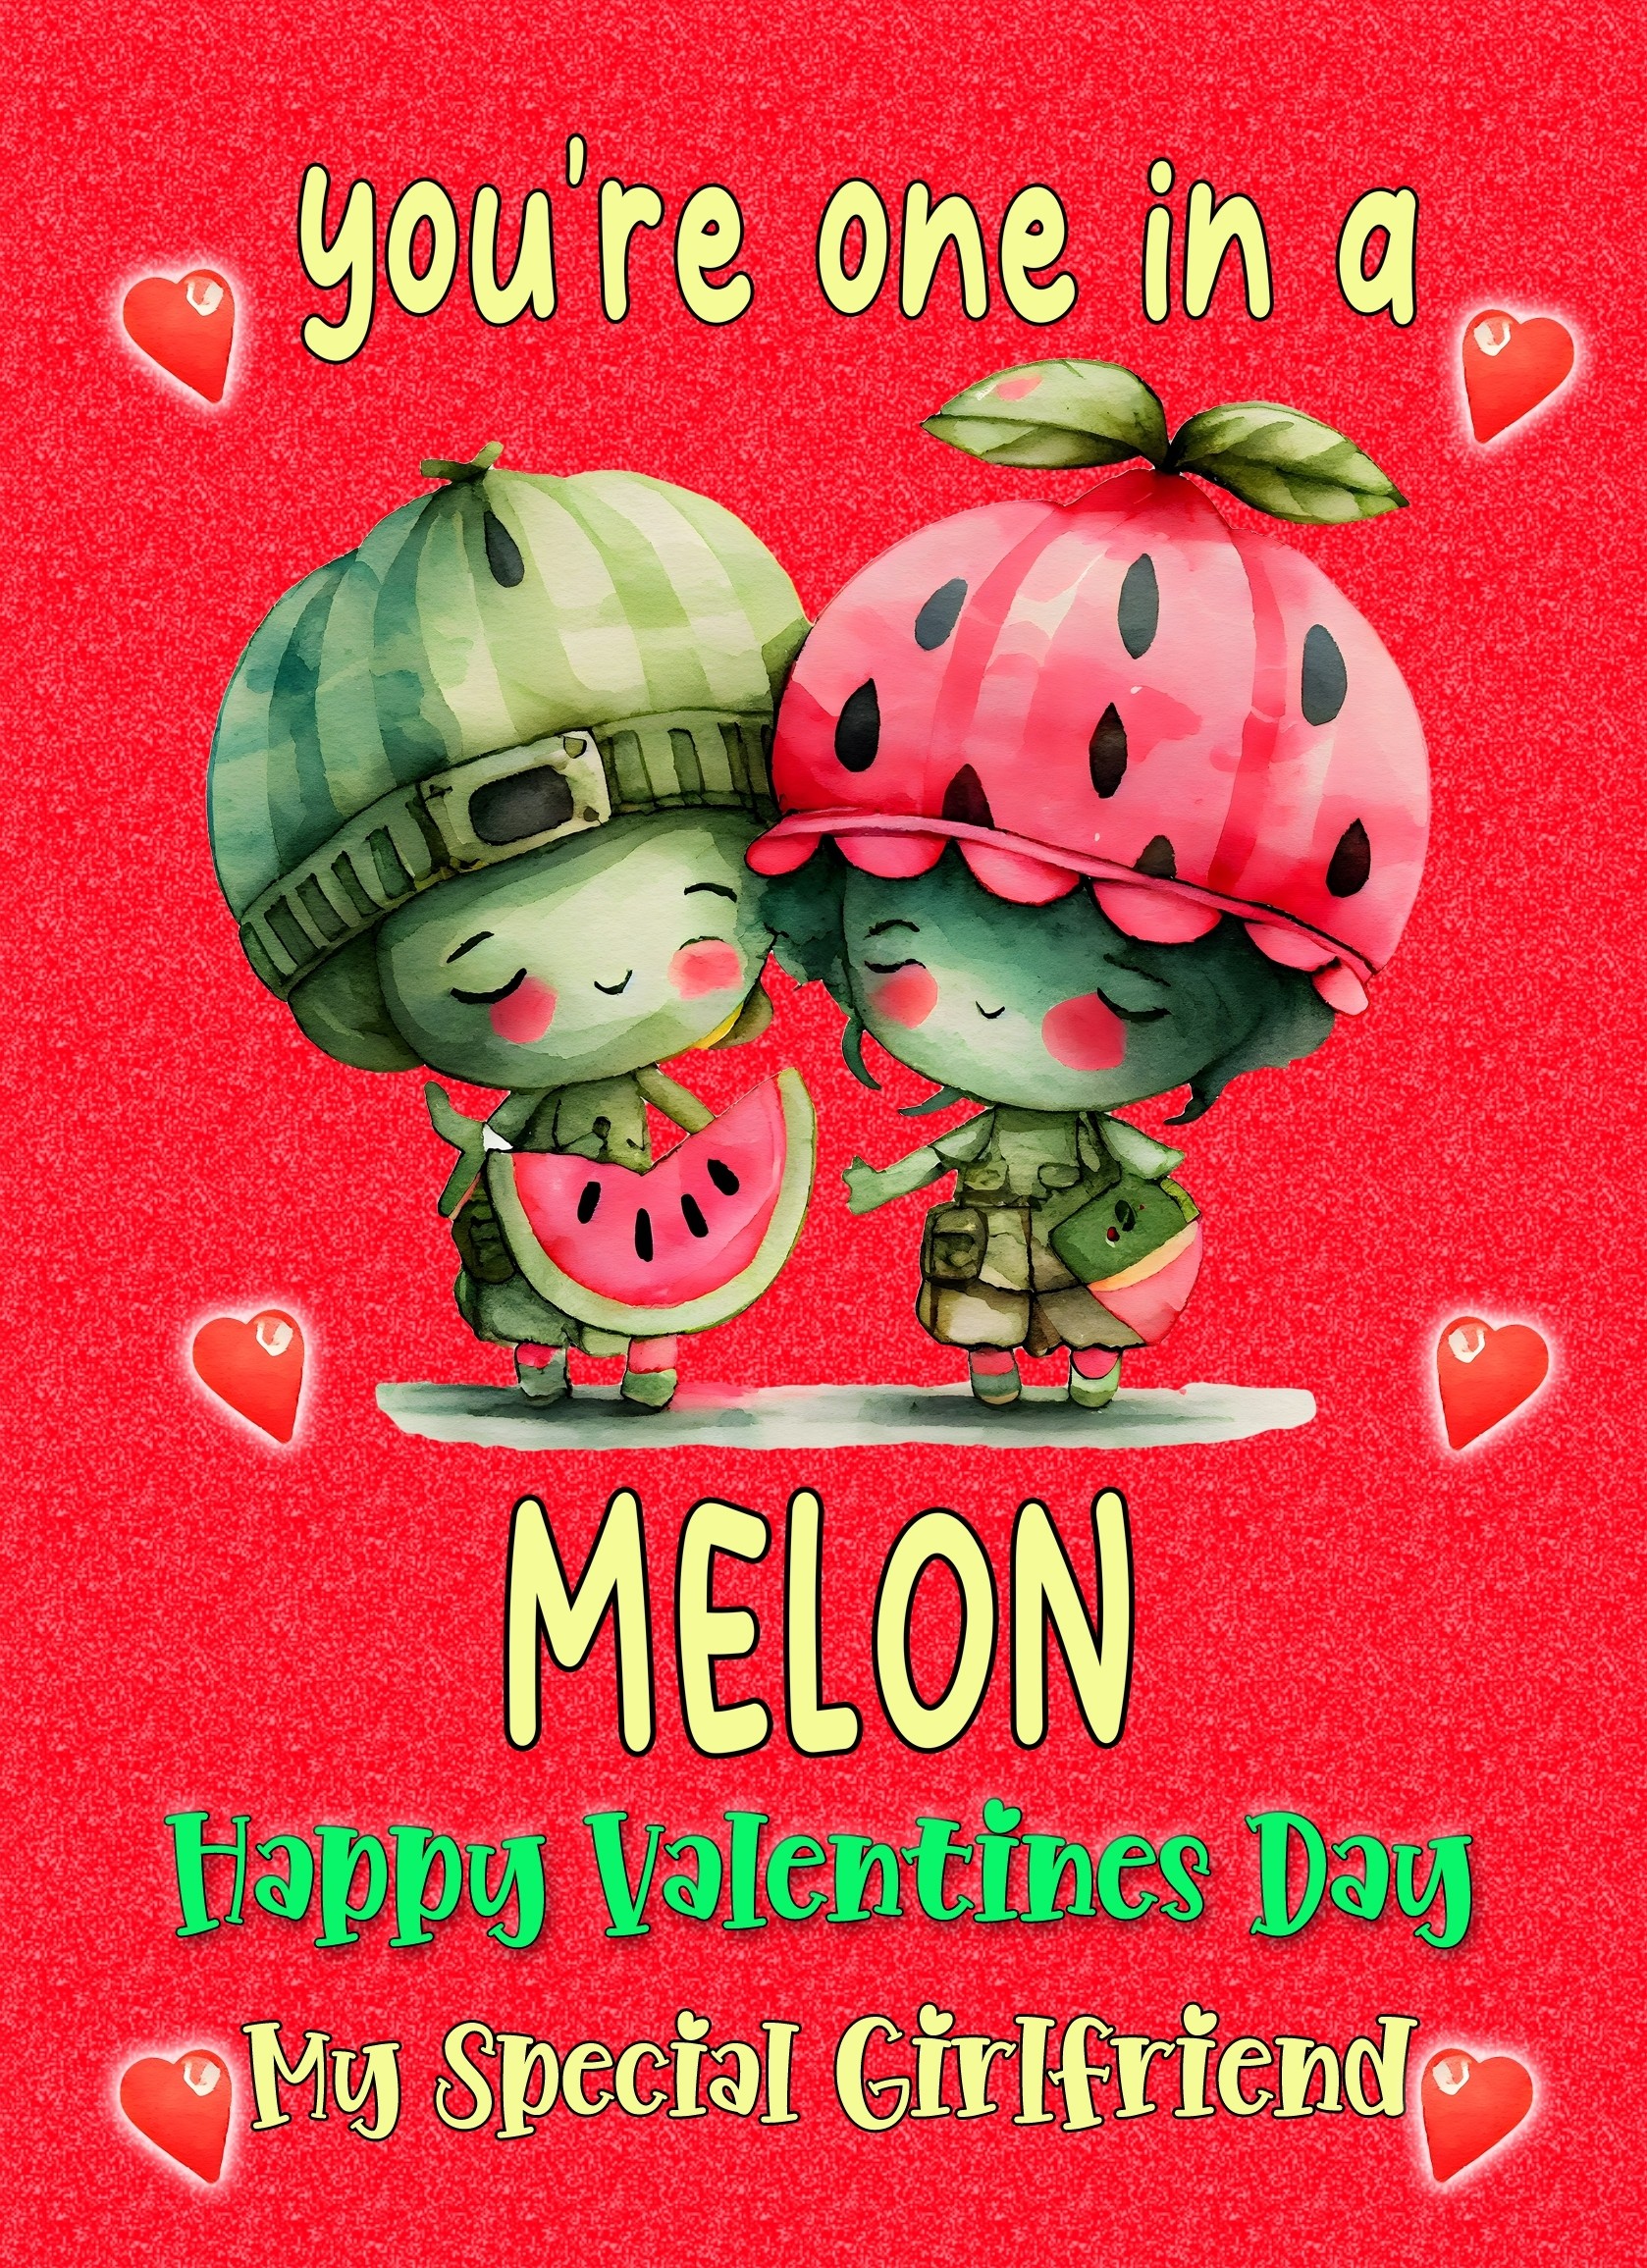 Funny Pun Valentines Day Card for Girlfriend (One in a Melon)